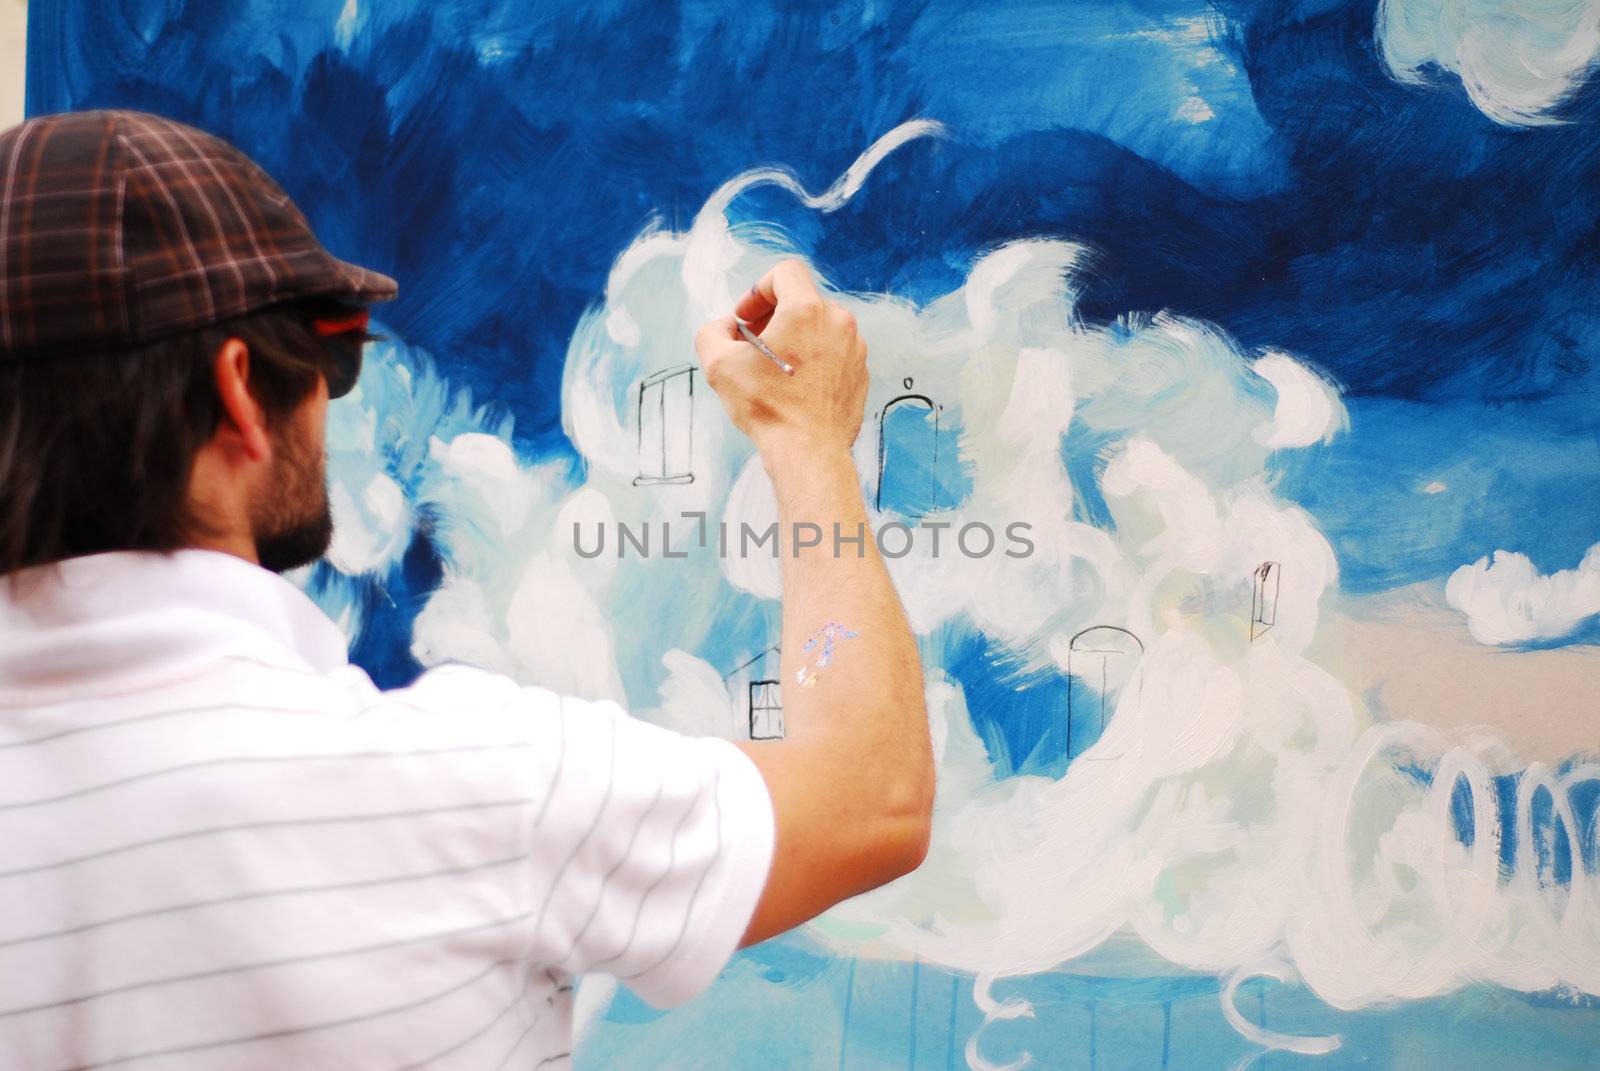 image with a young man painting taken from behind